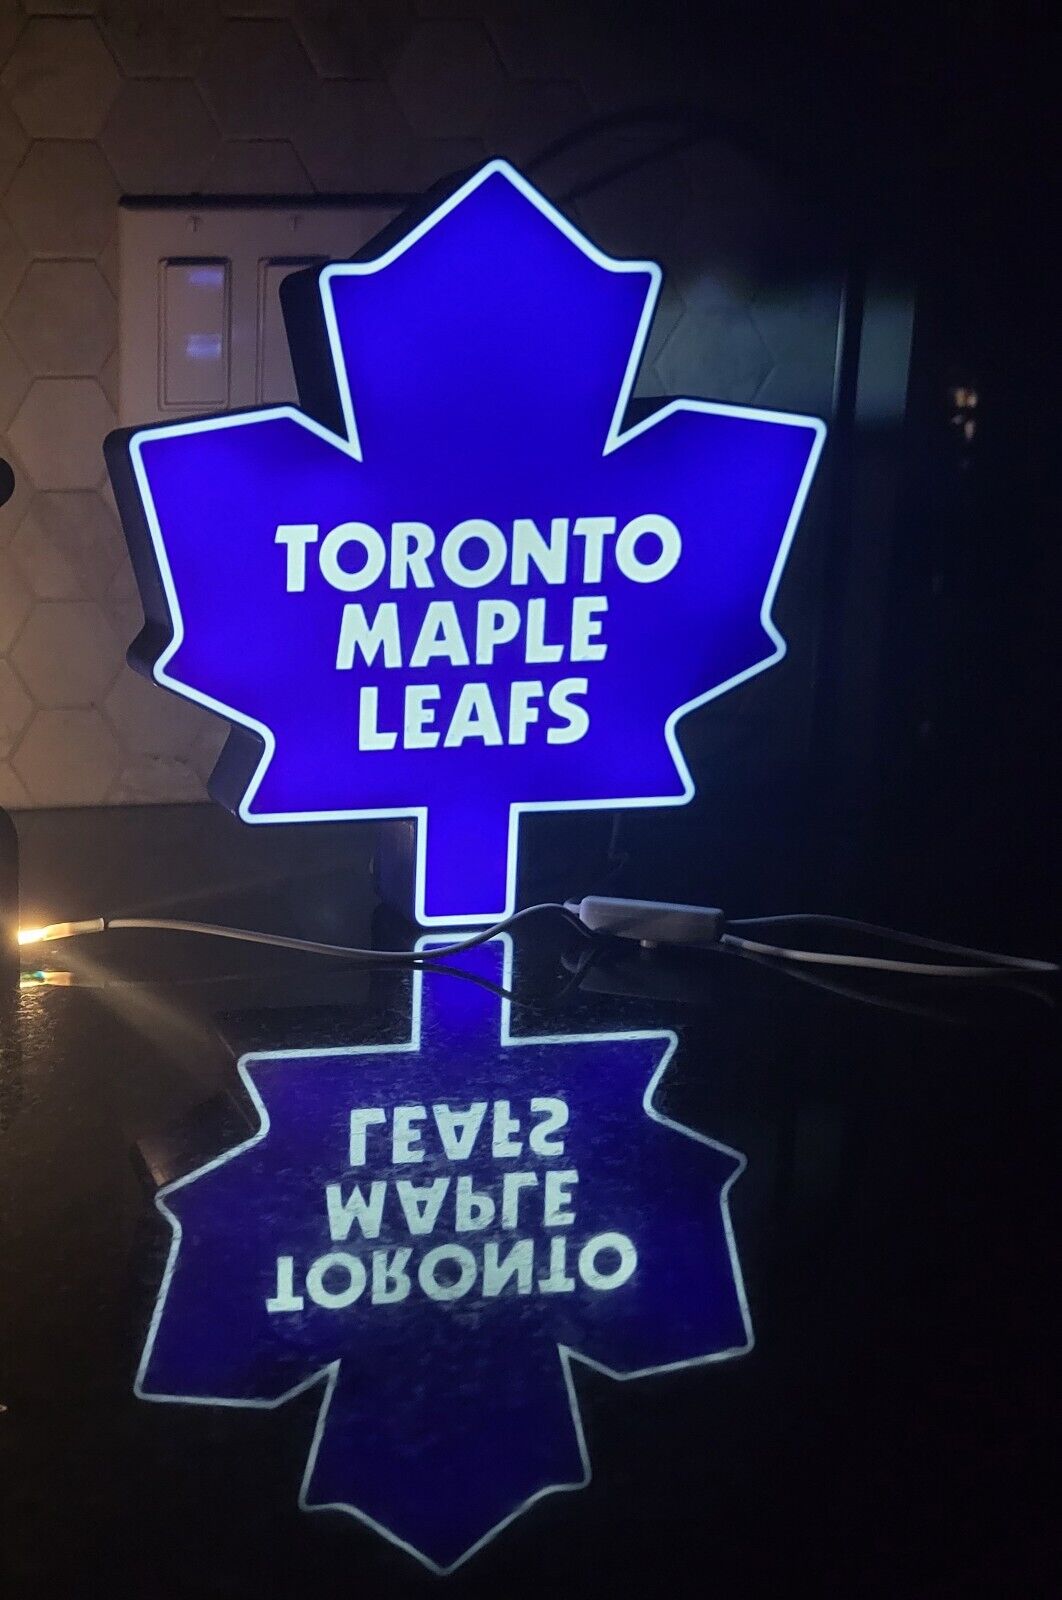 Toronto Maple Leafs LED lighted sign